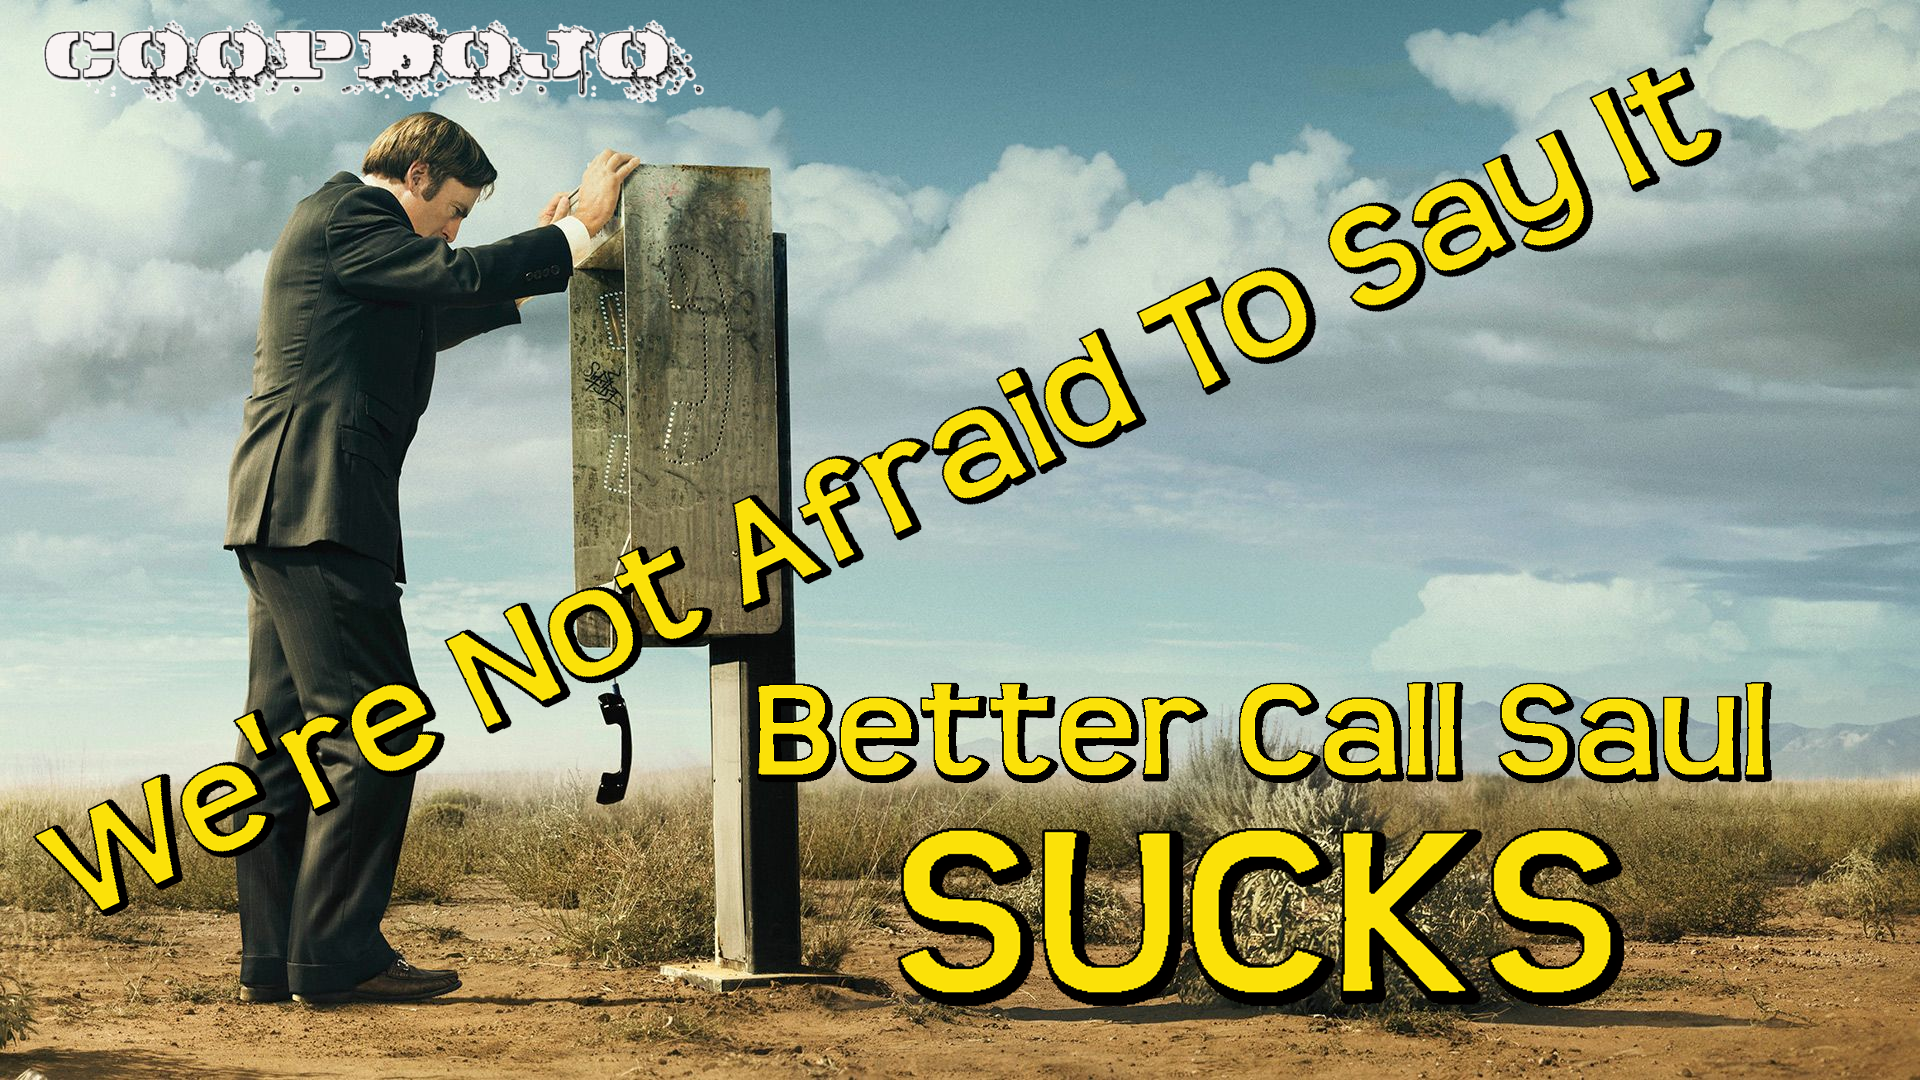 We’re Not Afraid To Say It: Better Call Saul Sucks